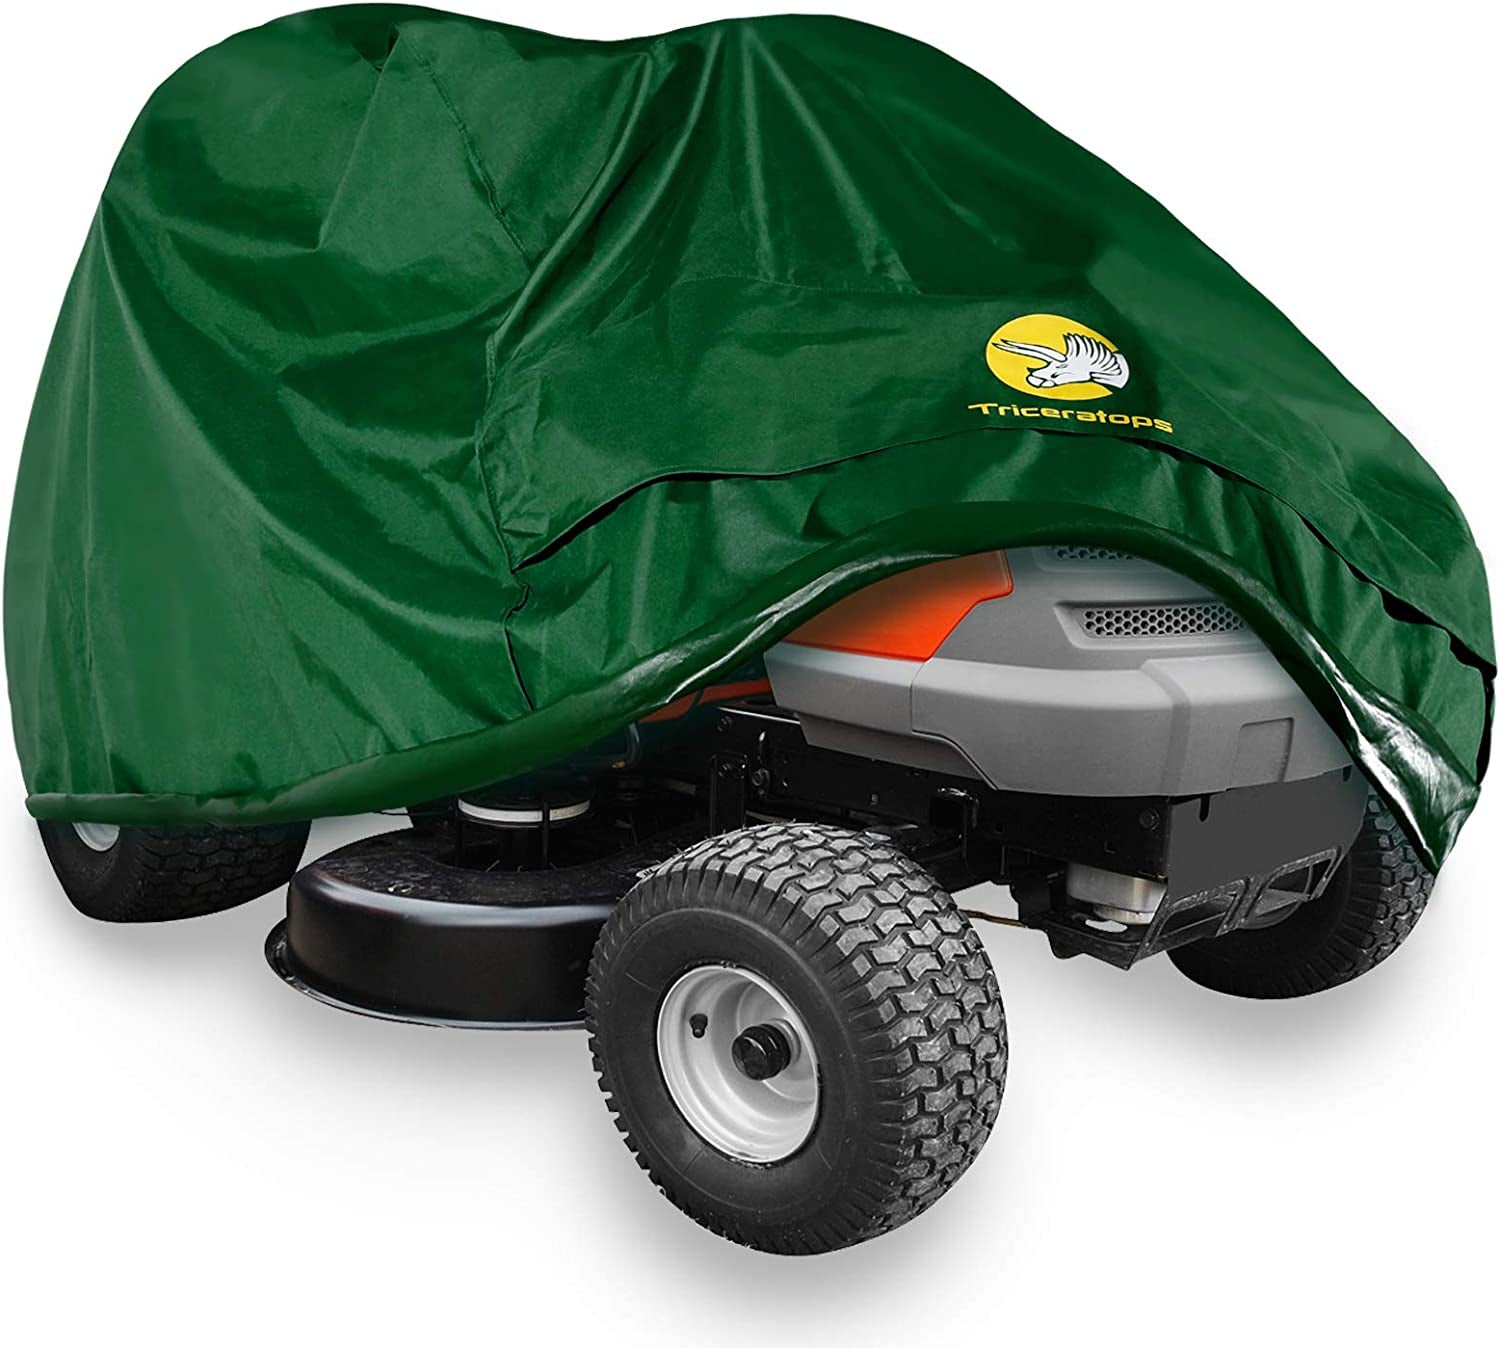 Triceratops, Lawn Mower Cover - Heavy Duty 600D Polyester Oxford Waterproof, Tractor Cover Fits Decks up to 54", UV Protection Universal Fit with Drawstring All Season/Weather Protection